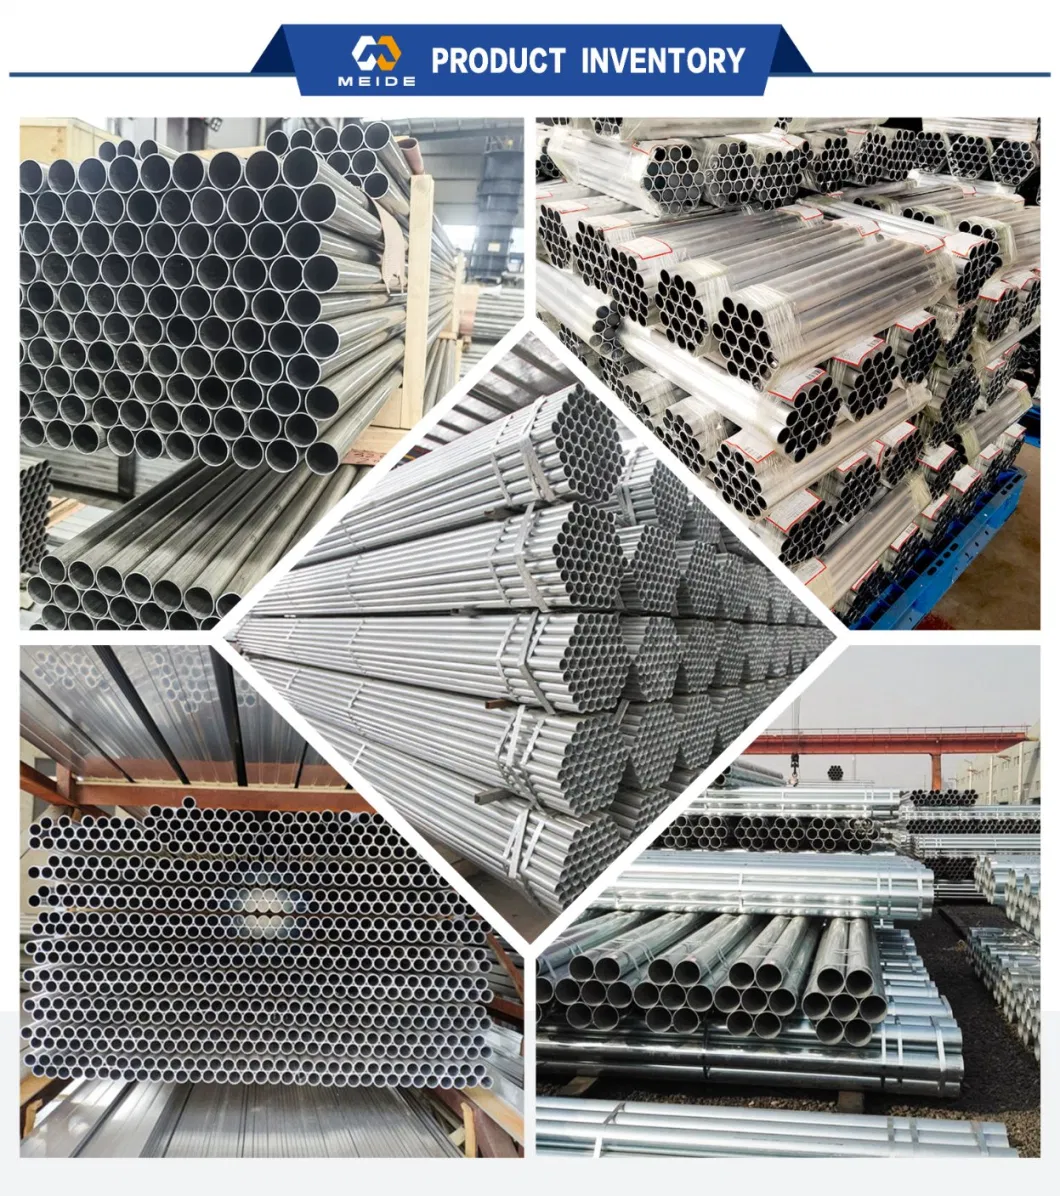 High Quality Alloy Aluminum Tubes 7050 Alzn5.5mgcu 7075 A7075 A97075 3.4365 Aluminum Tubes Are Used for Aircraft Structural/Rivet/Propeller Components